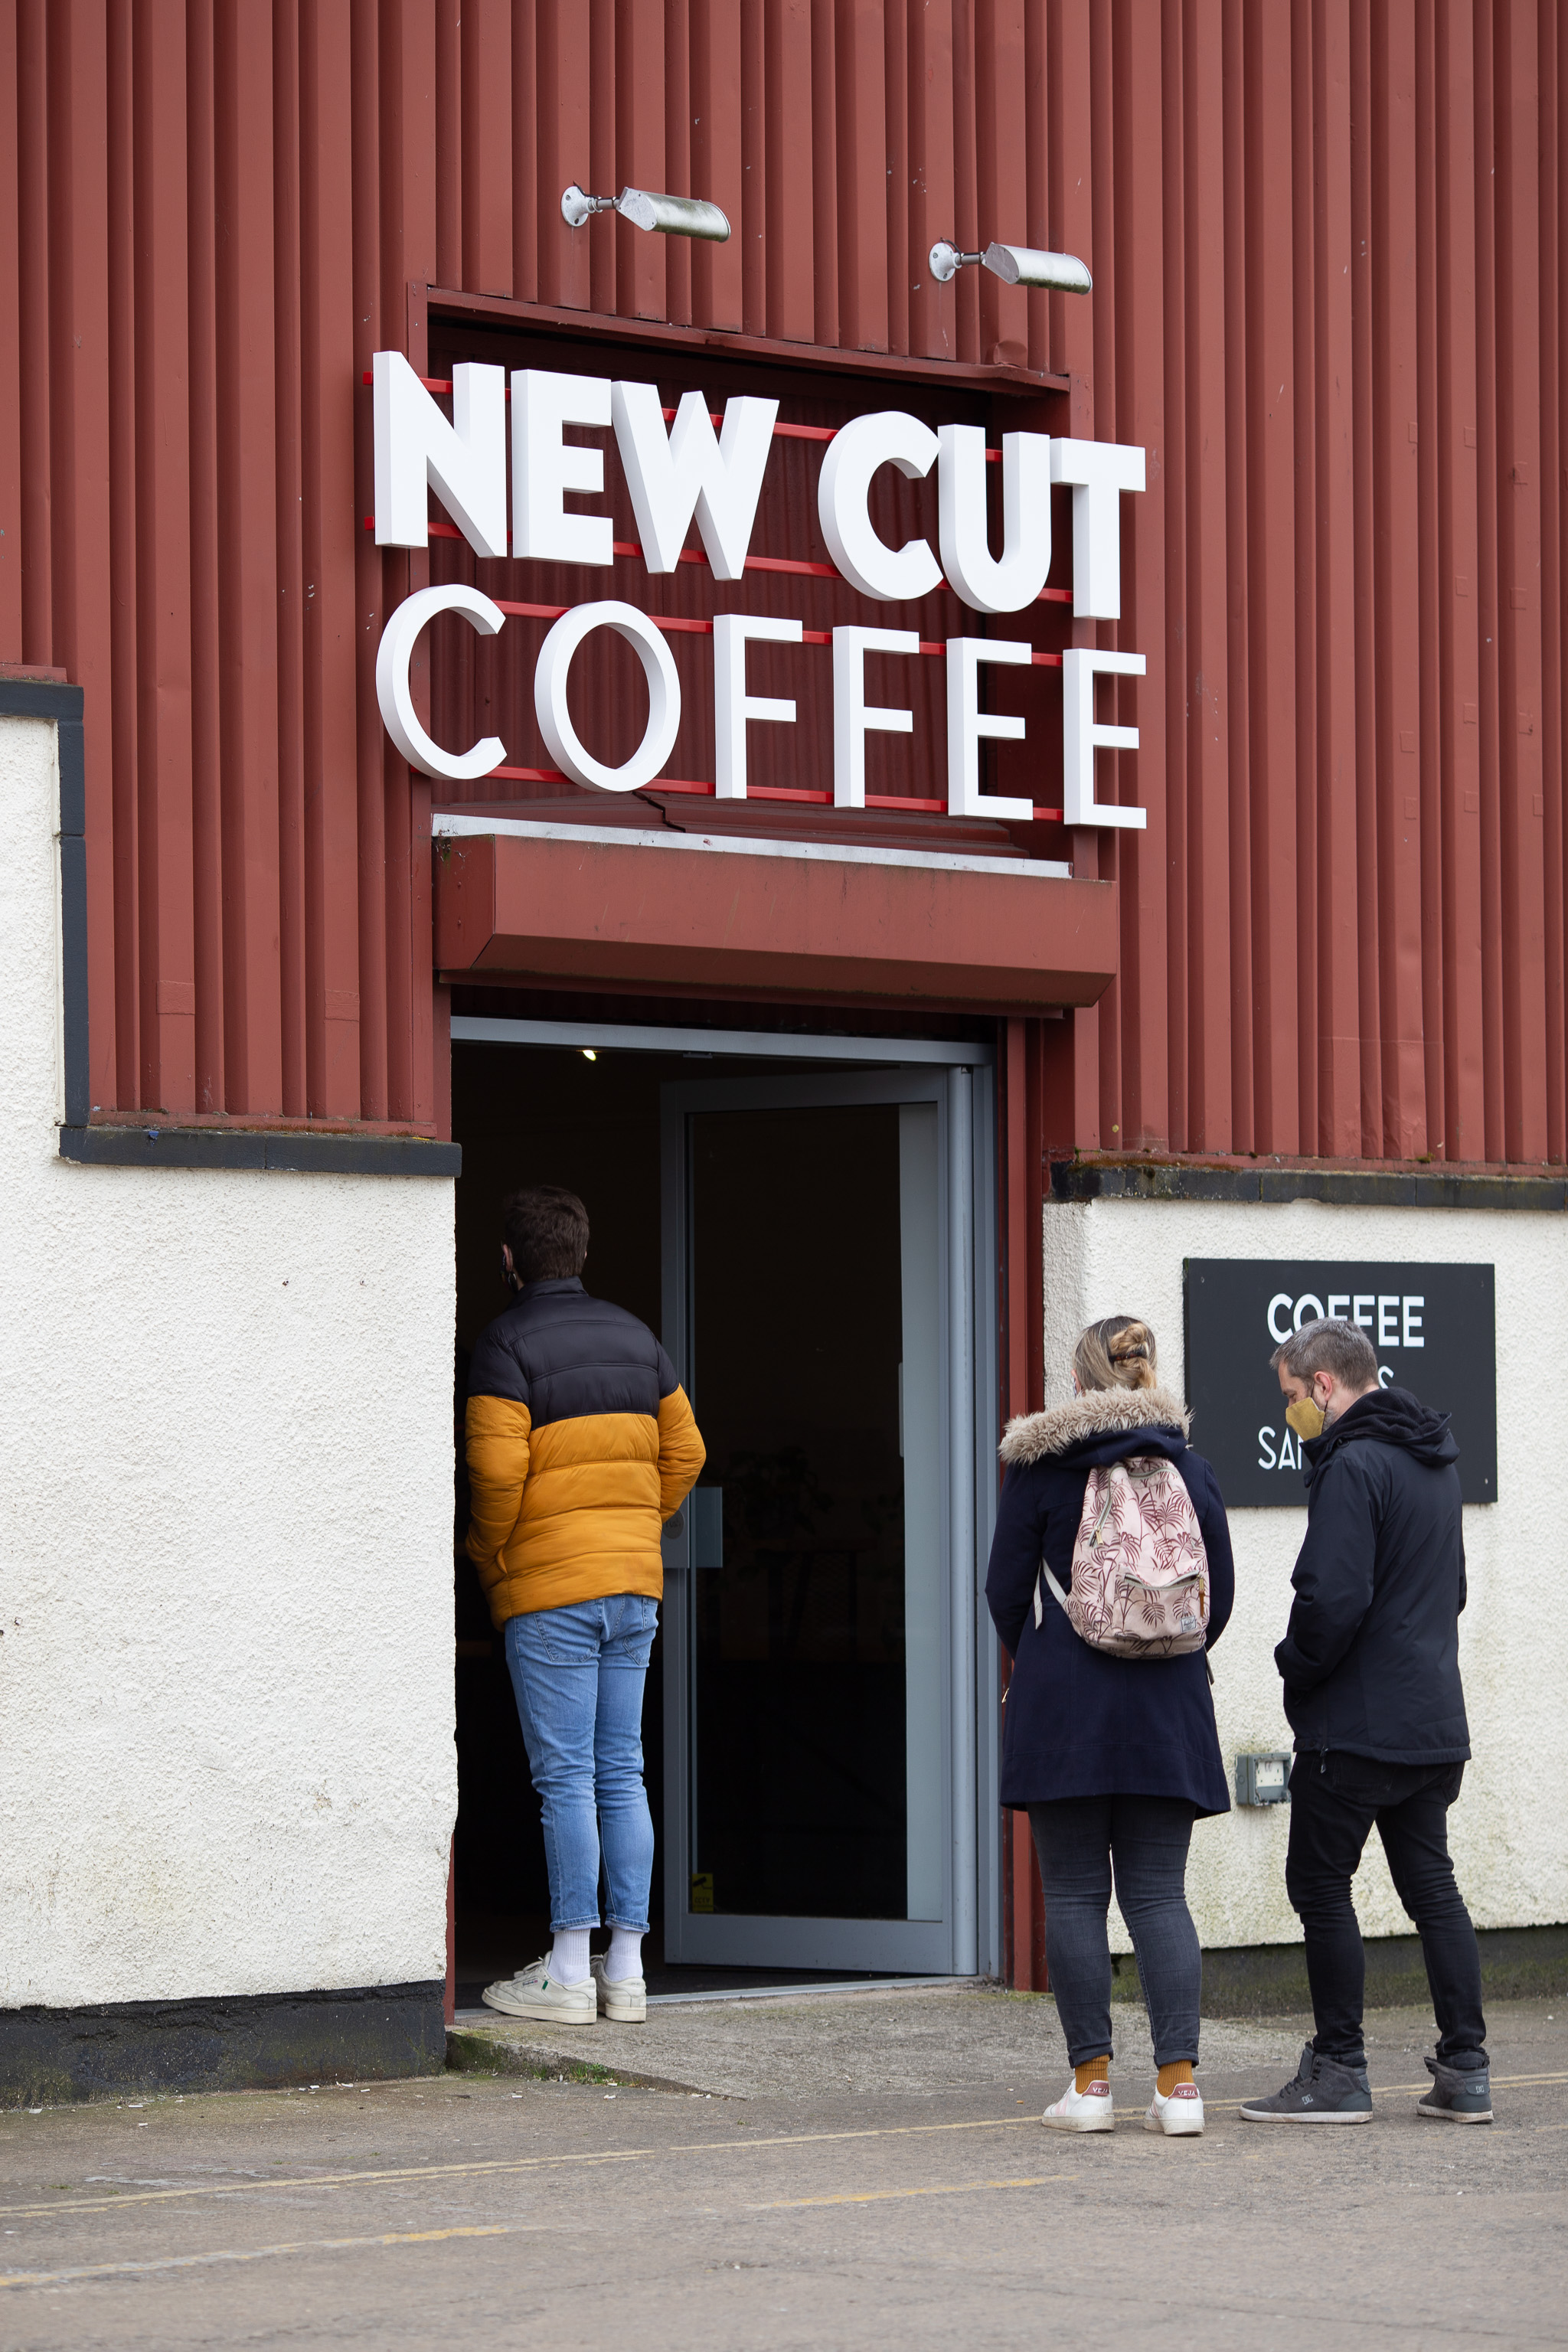 NEW CUT COFFEE
In what used to be the mediocre tea room for the Framing Factory/gallery. The new occupants are Jack Hudspith and Kate Evans, of Small Street Espre...